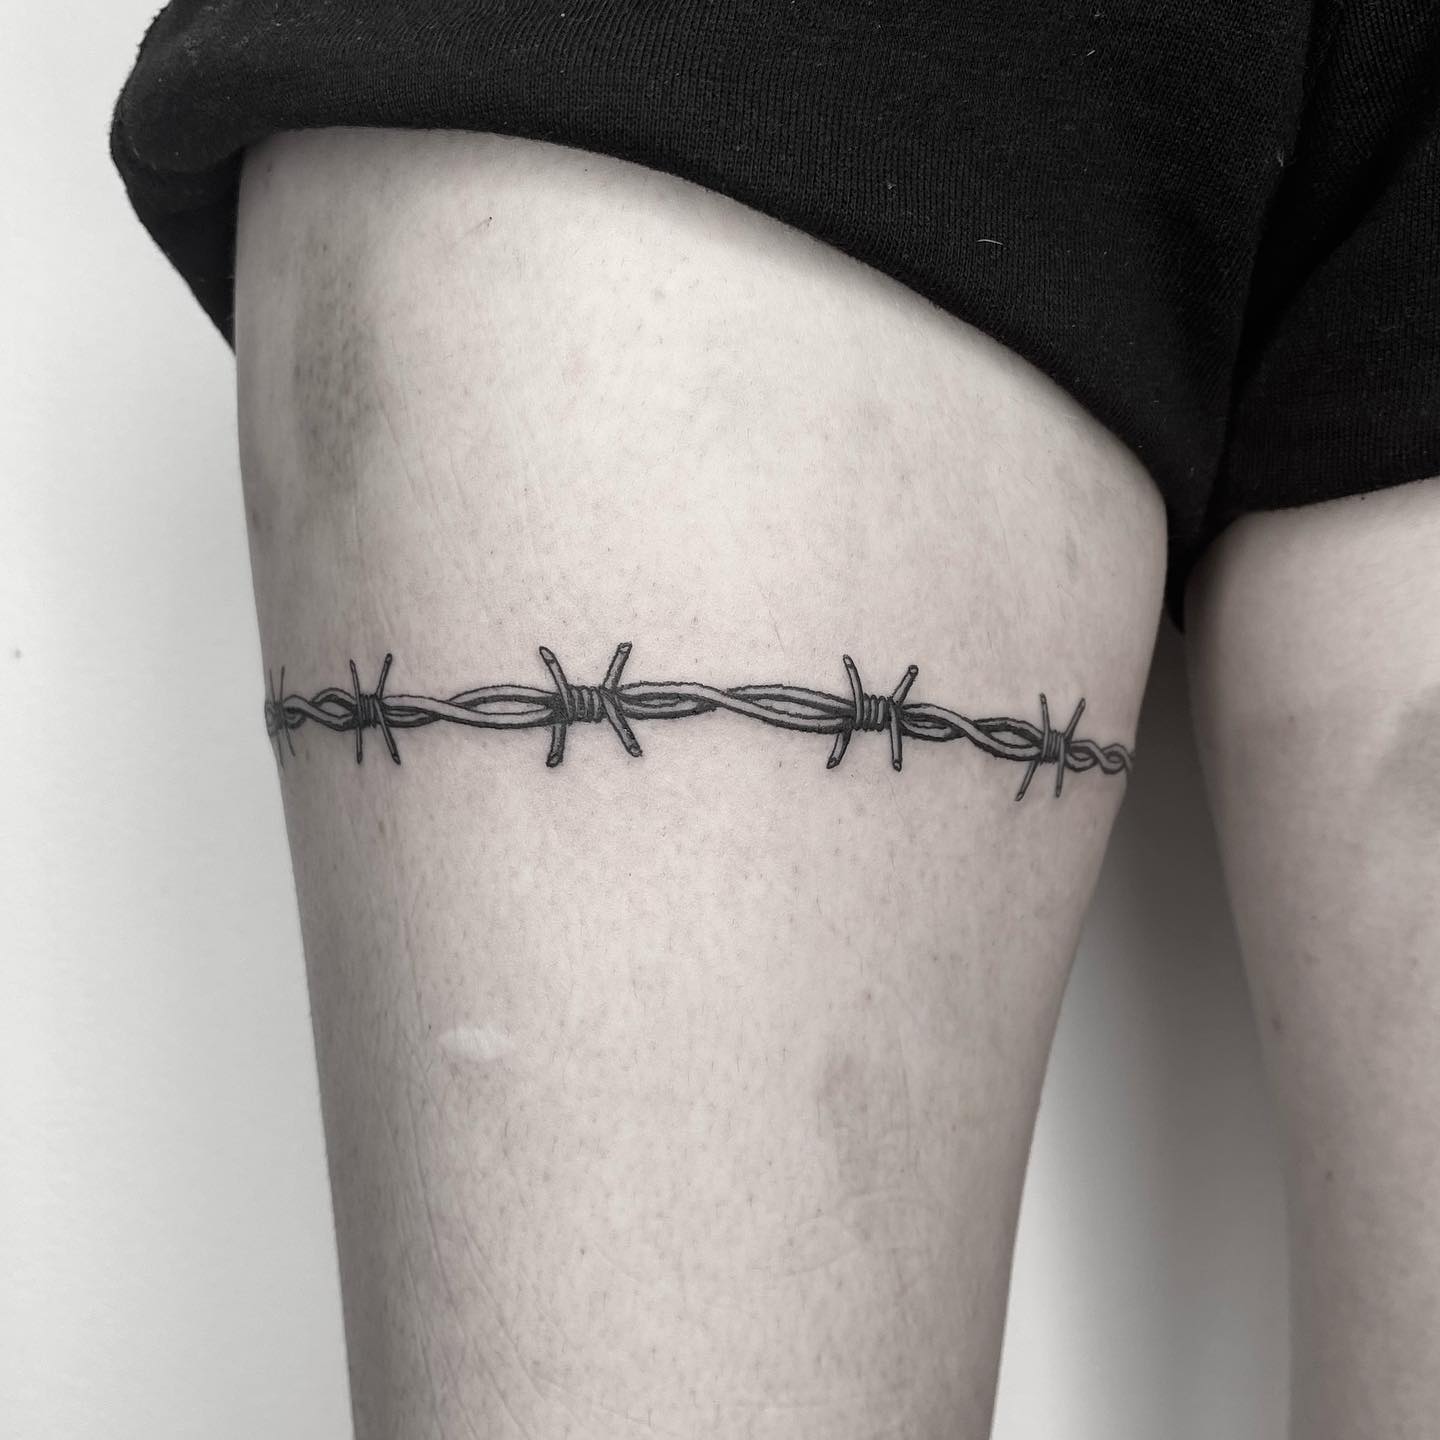 Thigh cover up tattoos are one of the sexiest things in this world. If you agree with me, just look at the perfection of this barbed wire tattoo on thigh. Can you see how clean the tattoo is? You should find a talented tattoo artist to get it.